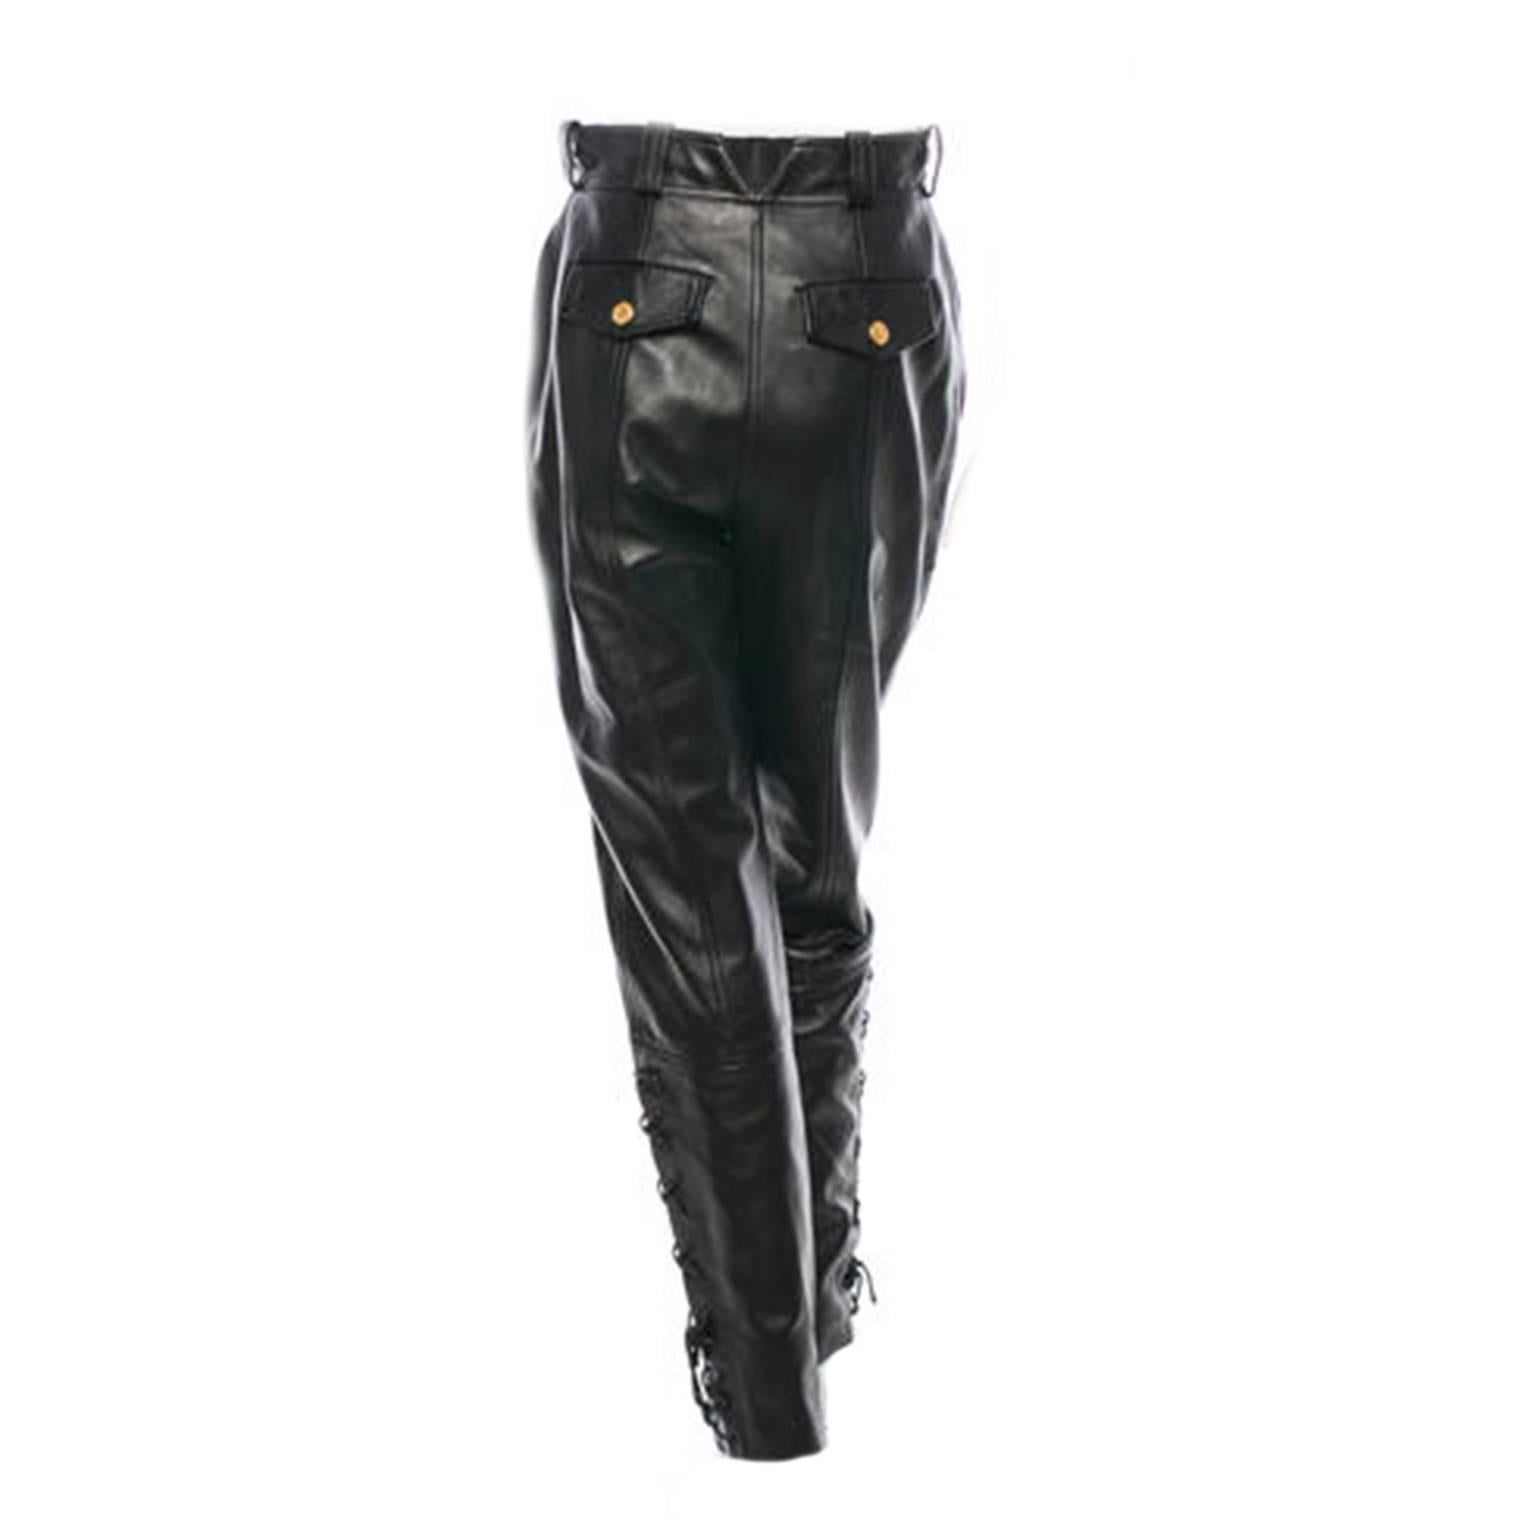 Black leather Chanel pants with four pockets, lace-up tie closures at sides, tonal stitching throughout and front zip closure.